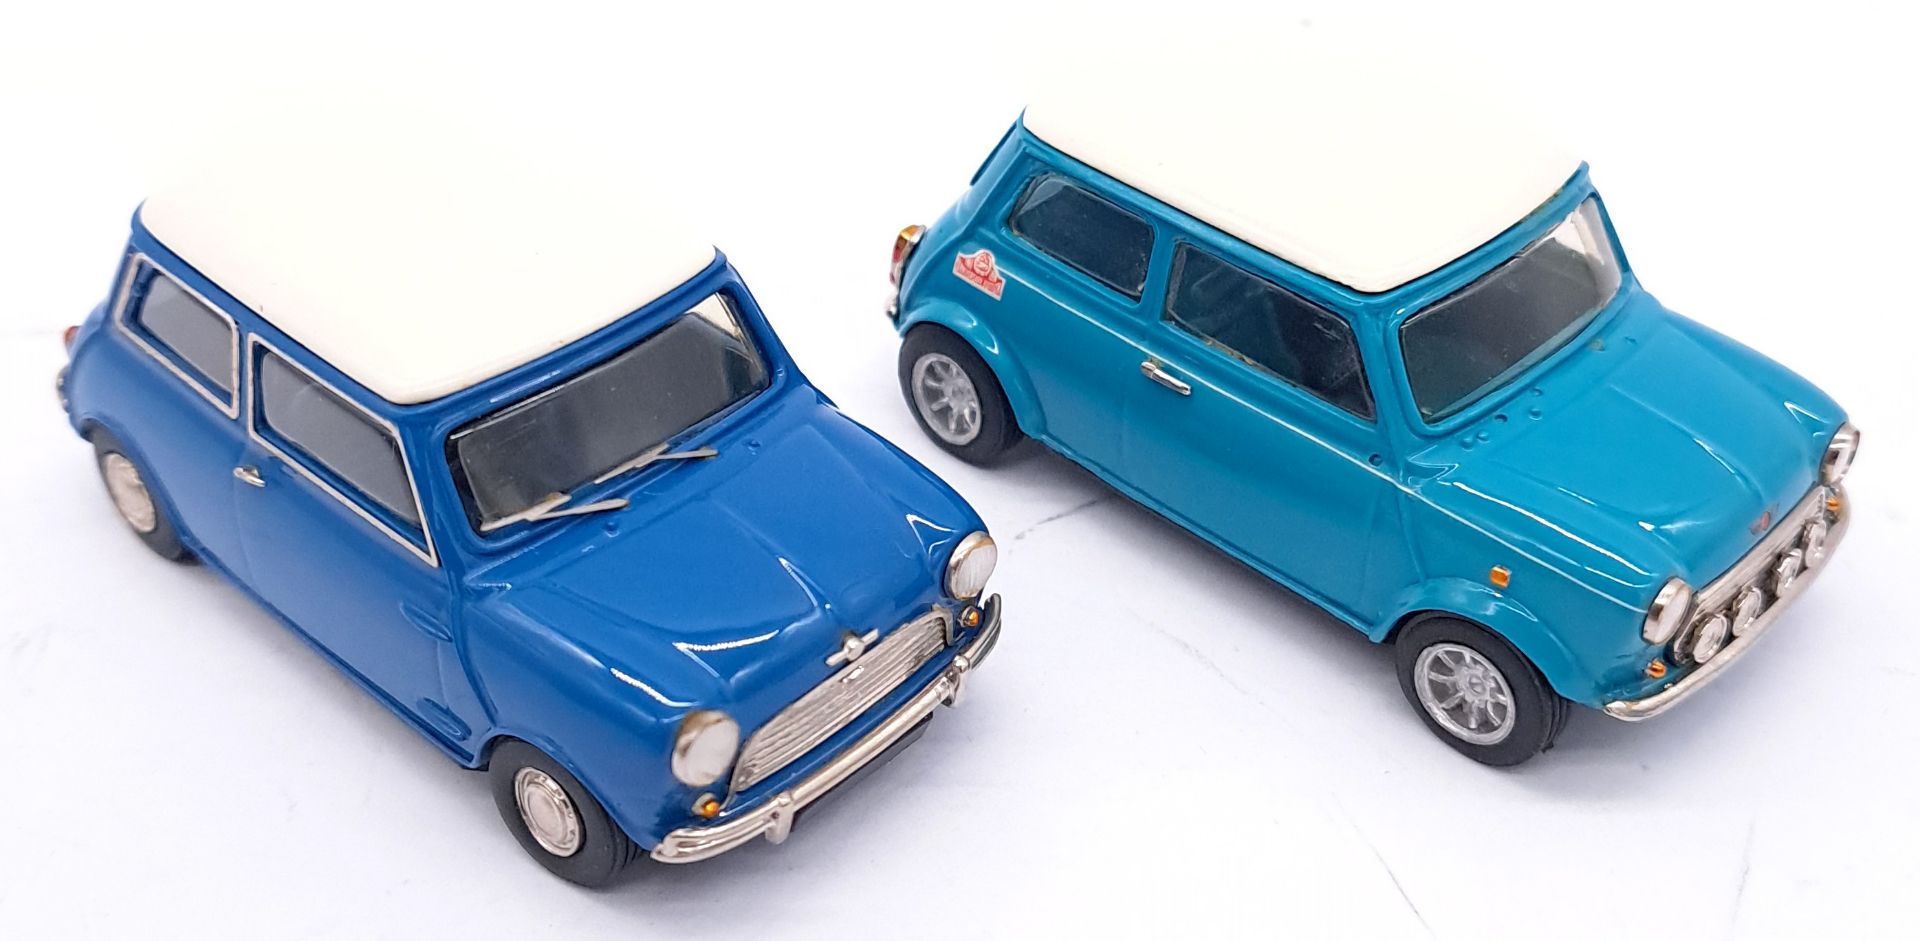 SMTS Voiturette V3 Mini Cooper Road Race Rally boxed pair - Image 5 of 8